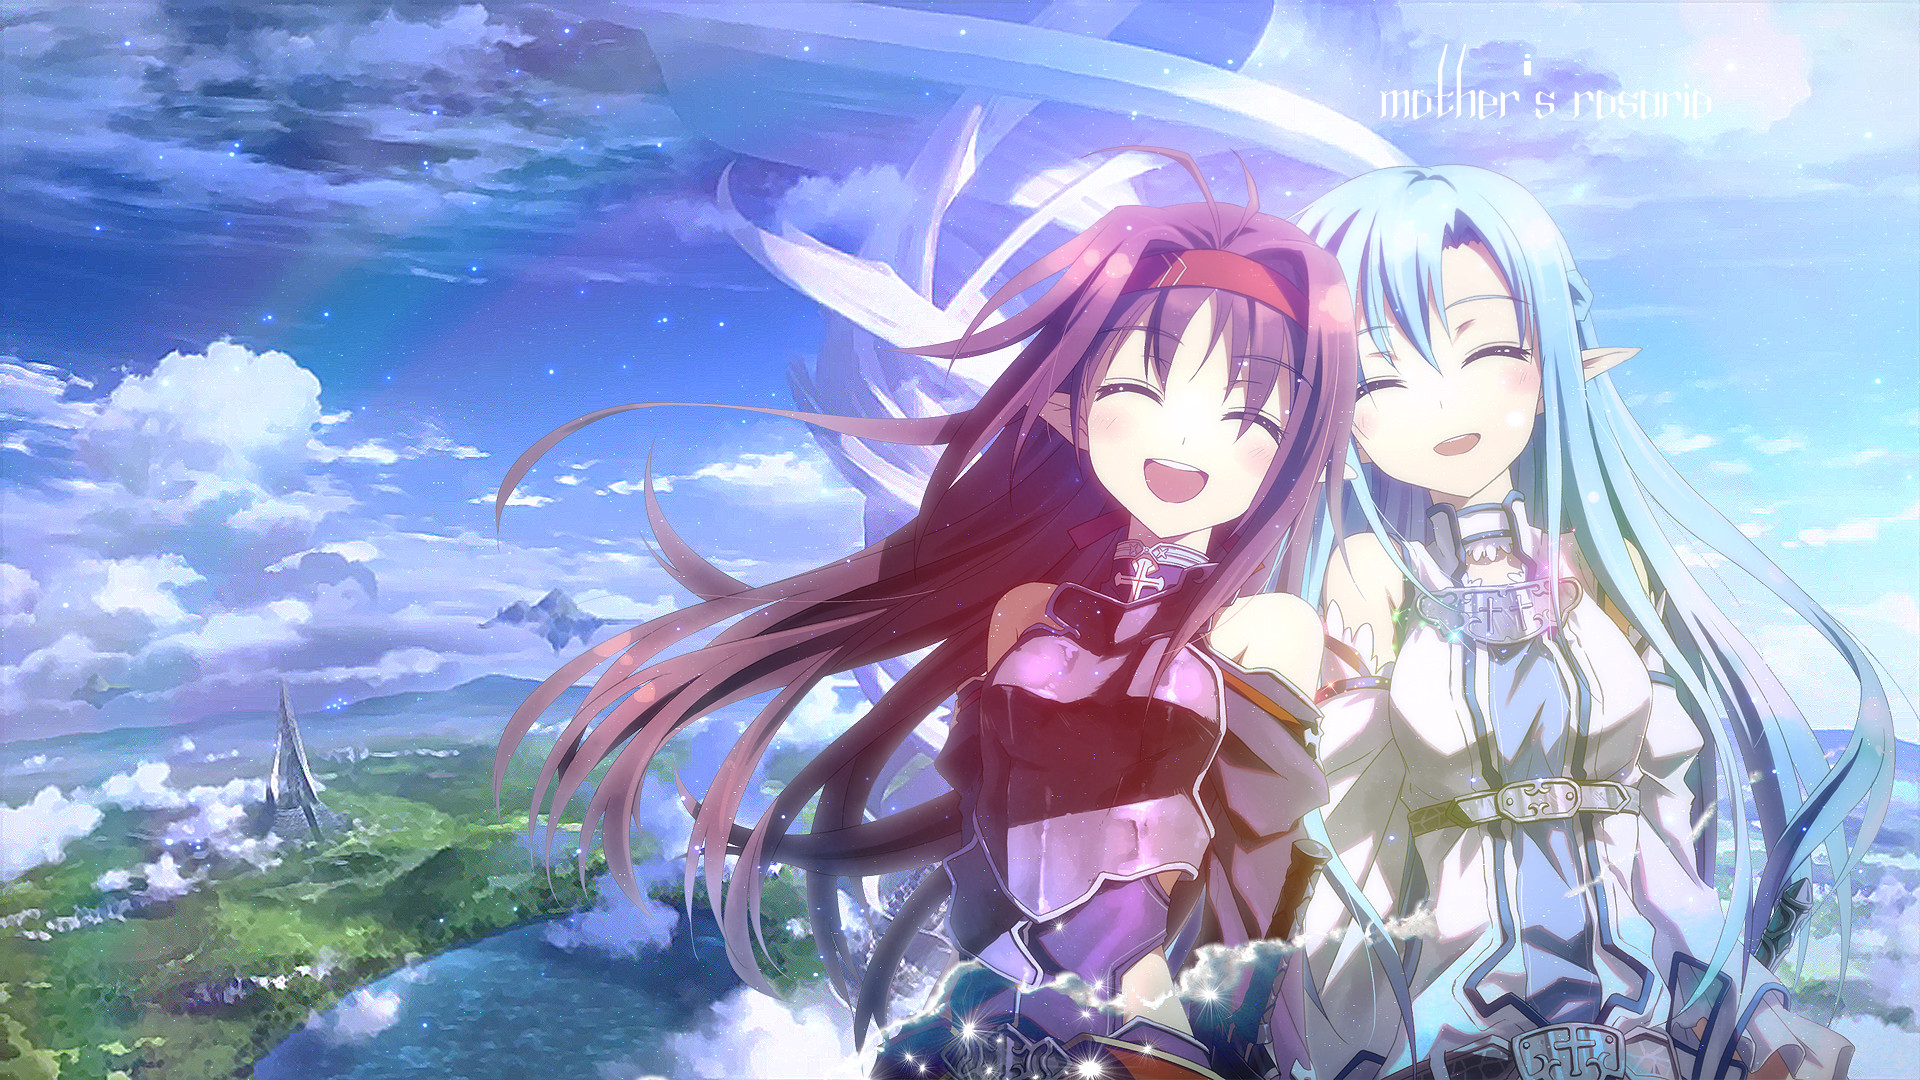 1920x1080 Sword art Online Mother's Rosario ~ Colorful Wish by lysergicX on .